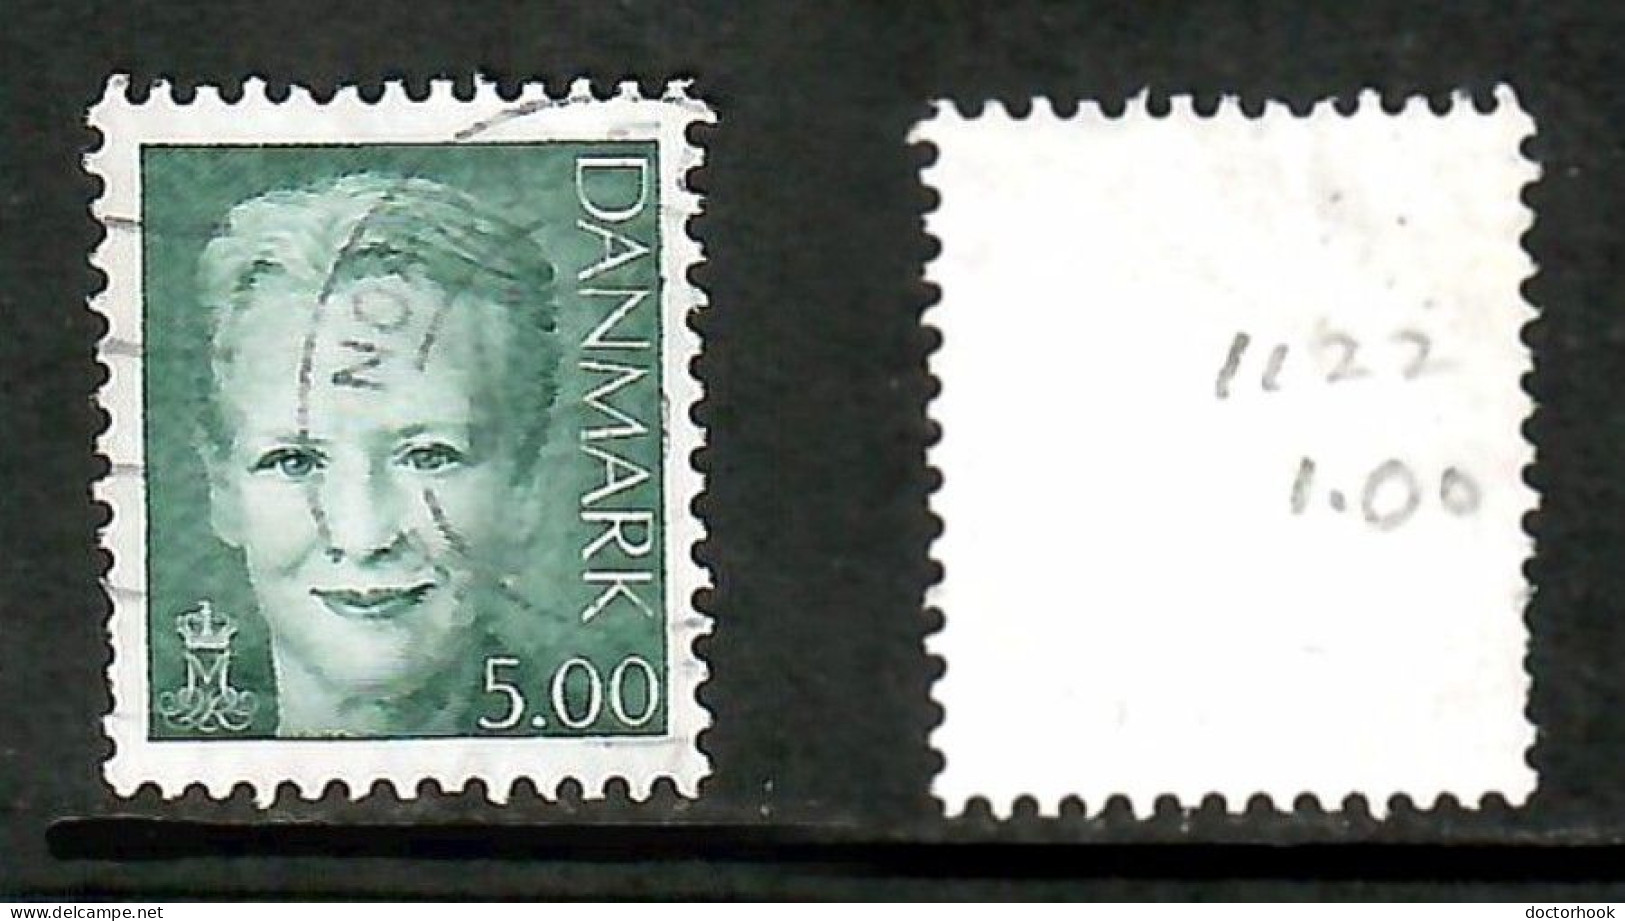 DENMARK   Scott # 1122 USED (CONDITION PER SCAN) (Stamp Scan # 1024-7) - Used Stamps